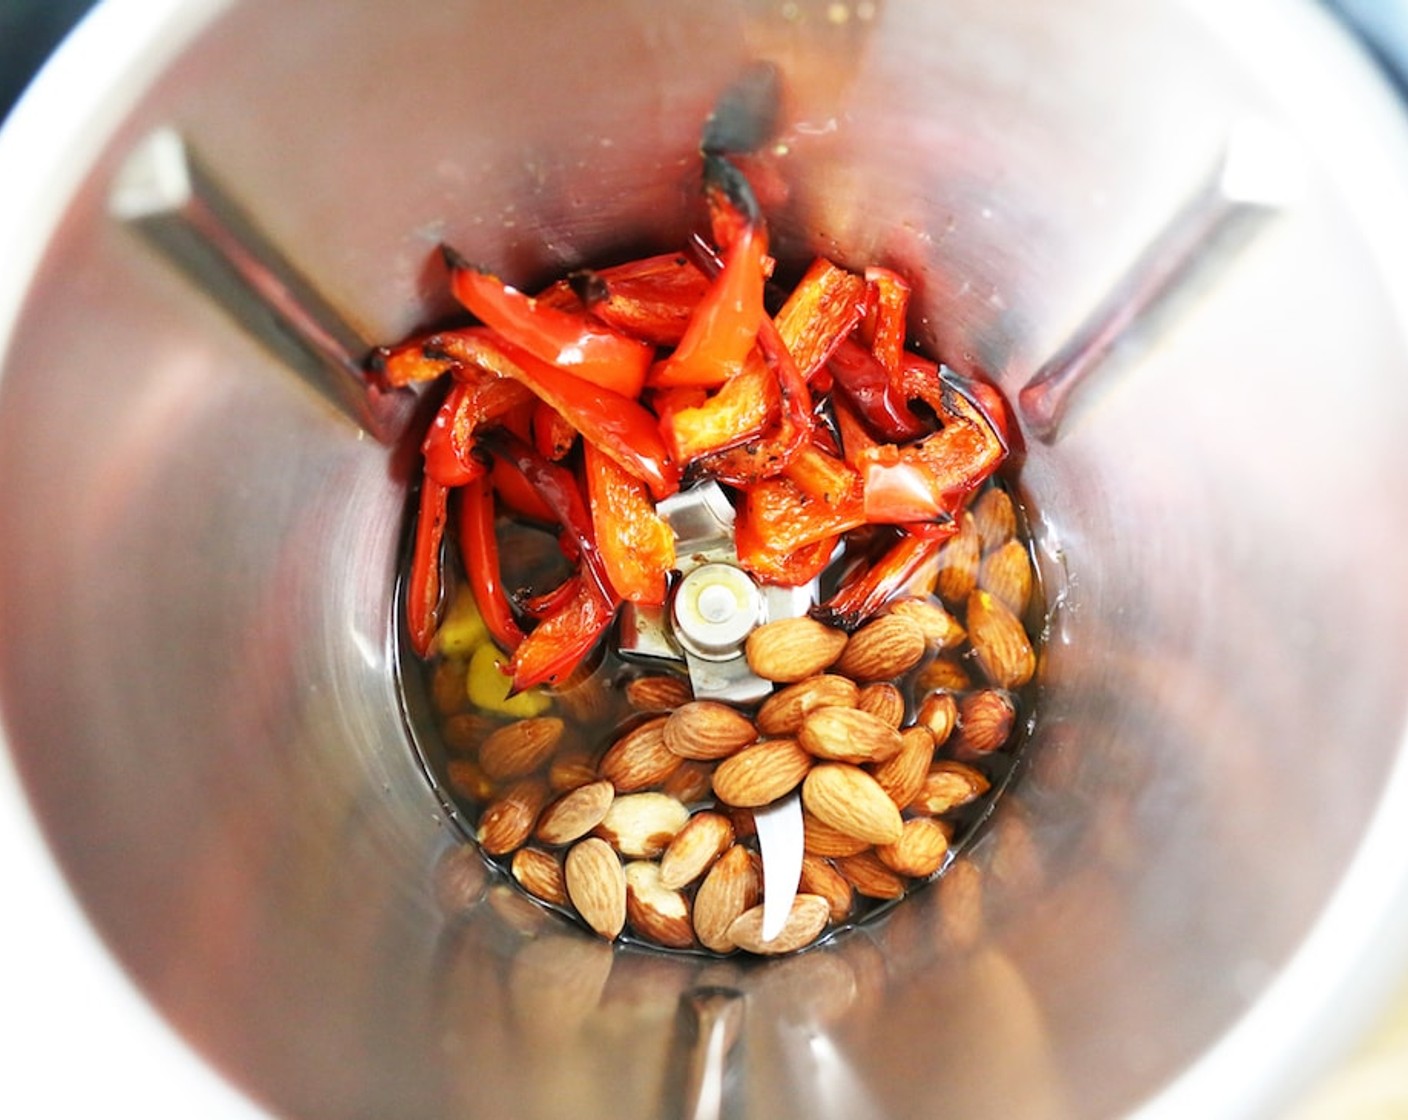 step 7 Make the red pepper sauce by placing red peppers, Garlic (1 clove), Almonds (1 cup), Lemon (1), in the Thermomix jug and blend for 45 seconds on speed 5.